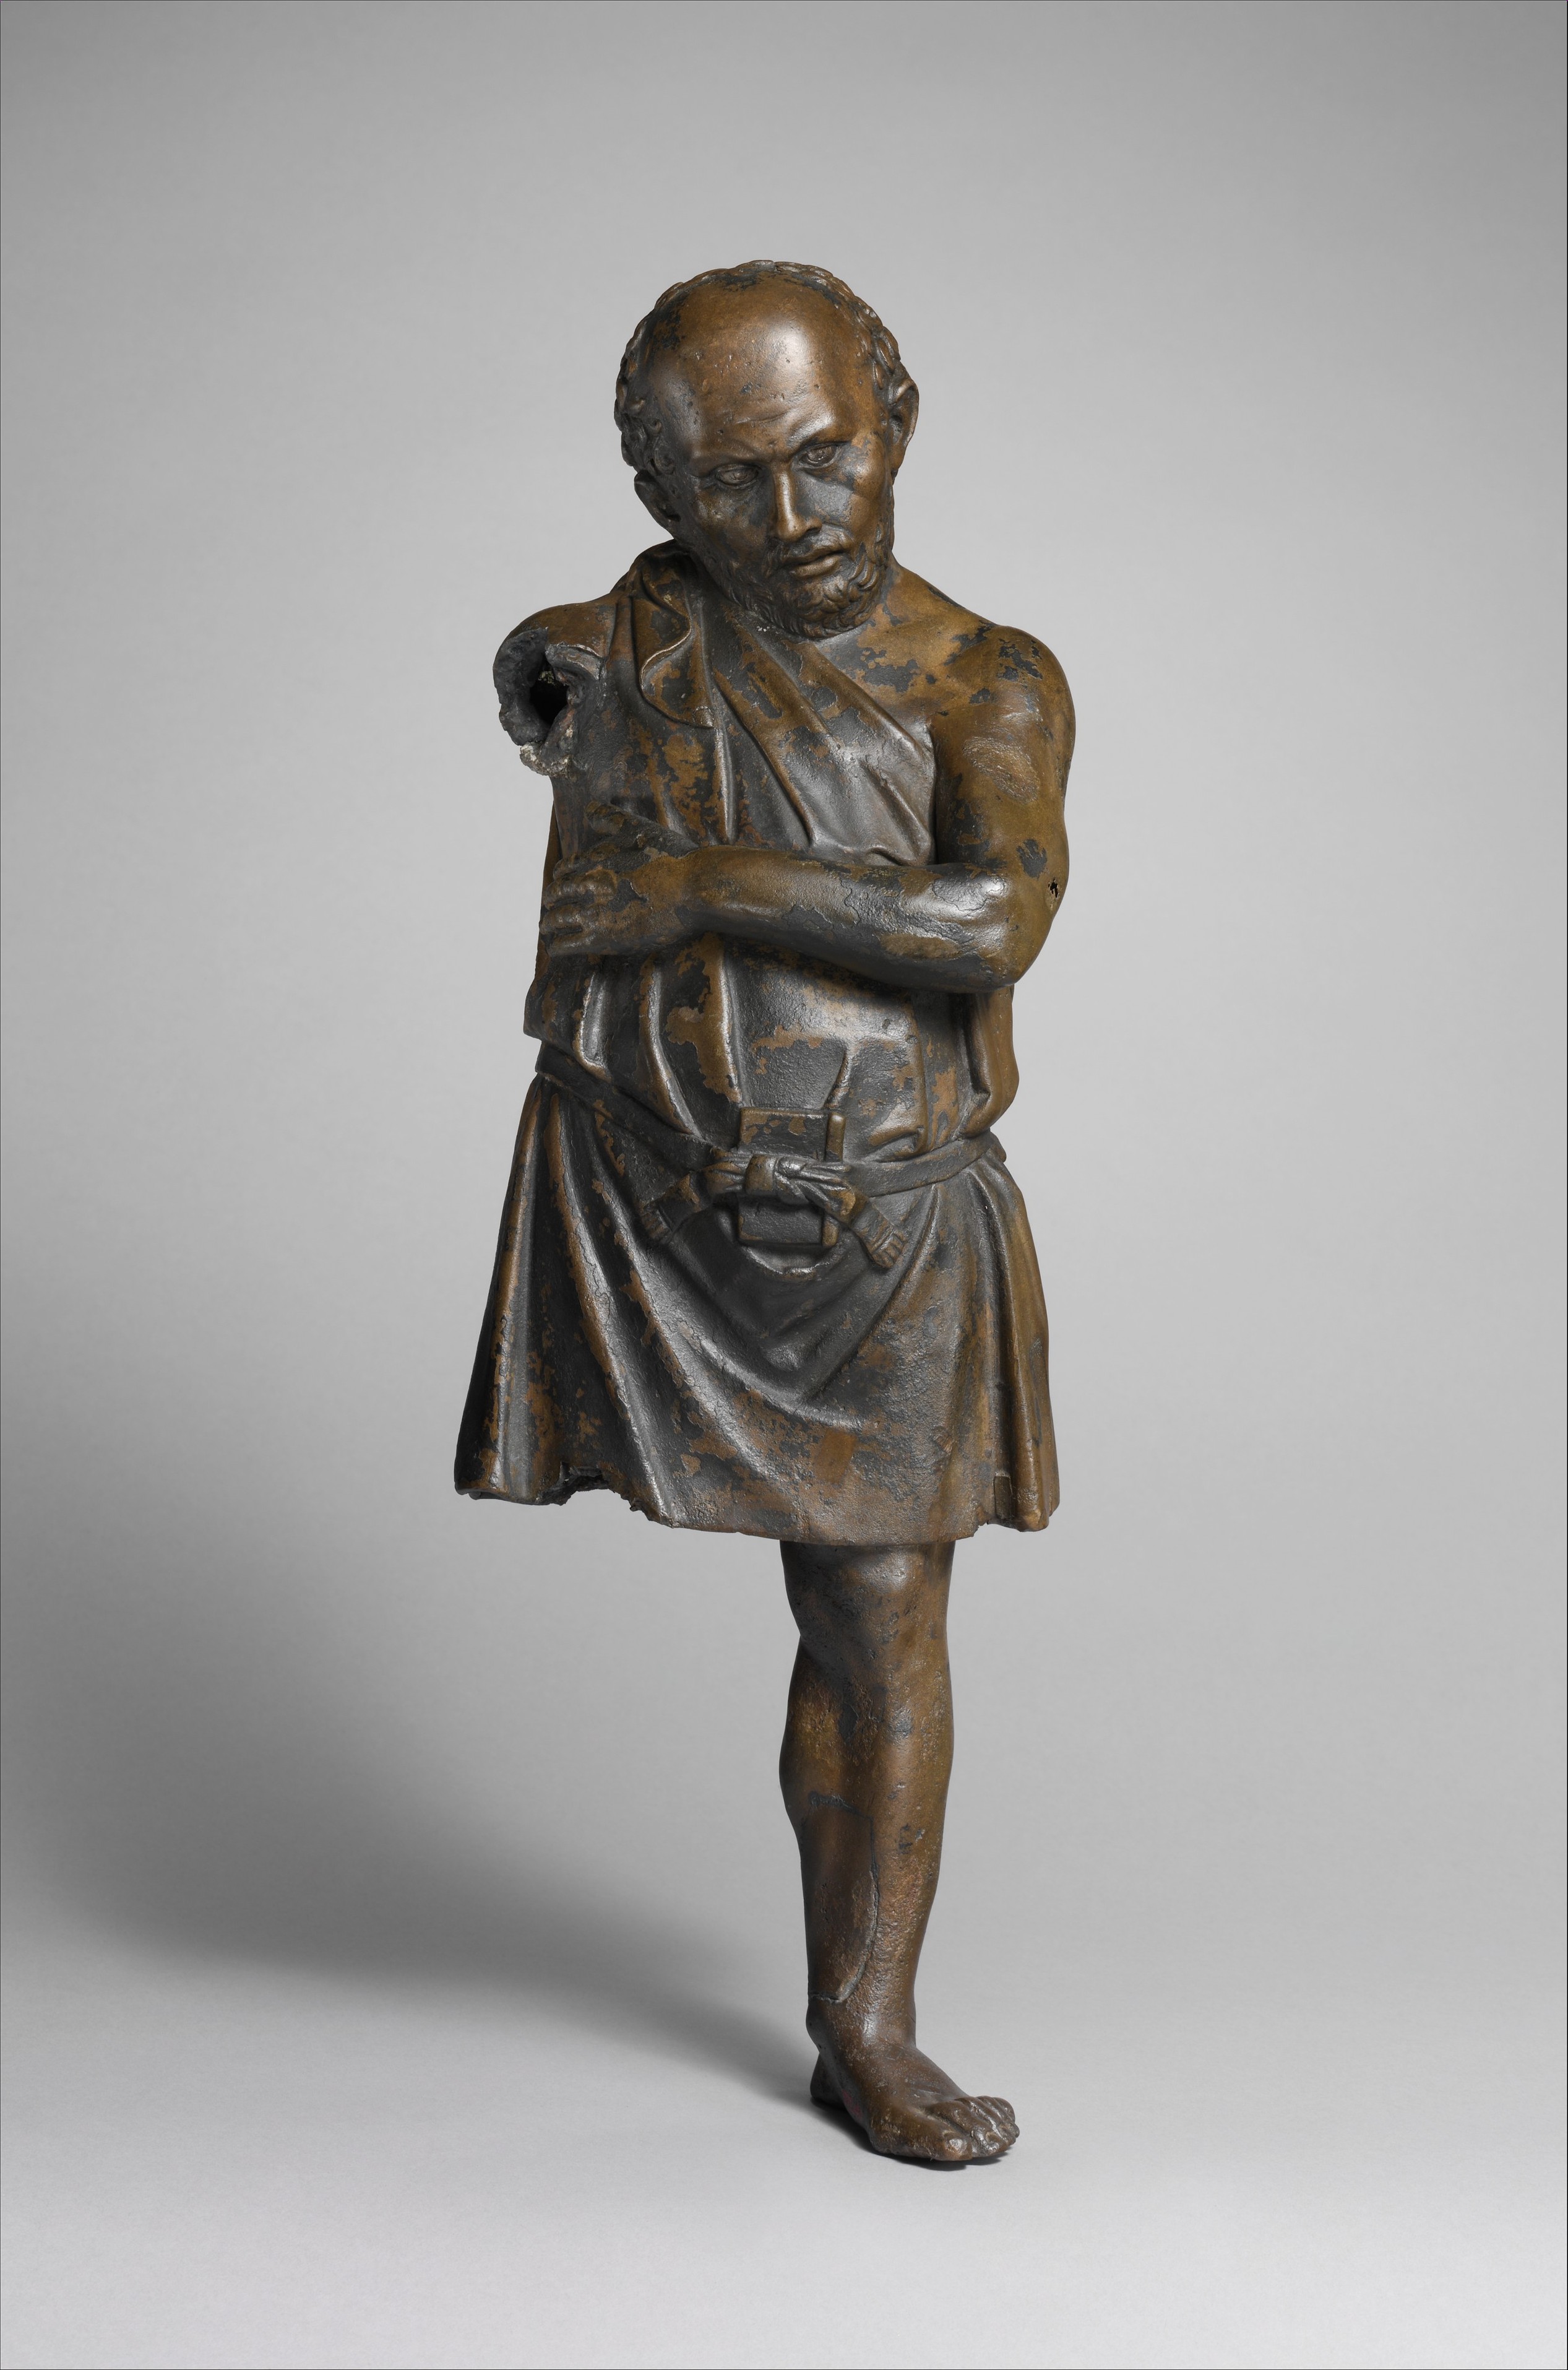 Bronze statuette of an artisan with silver eyes, Greek